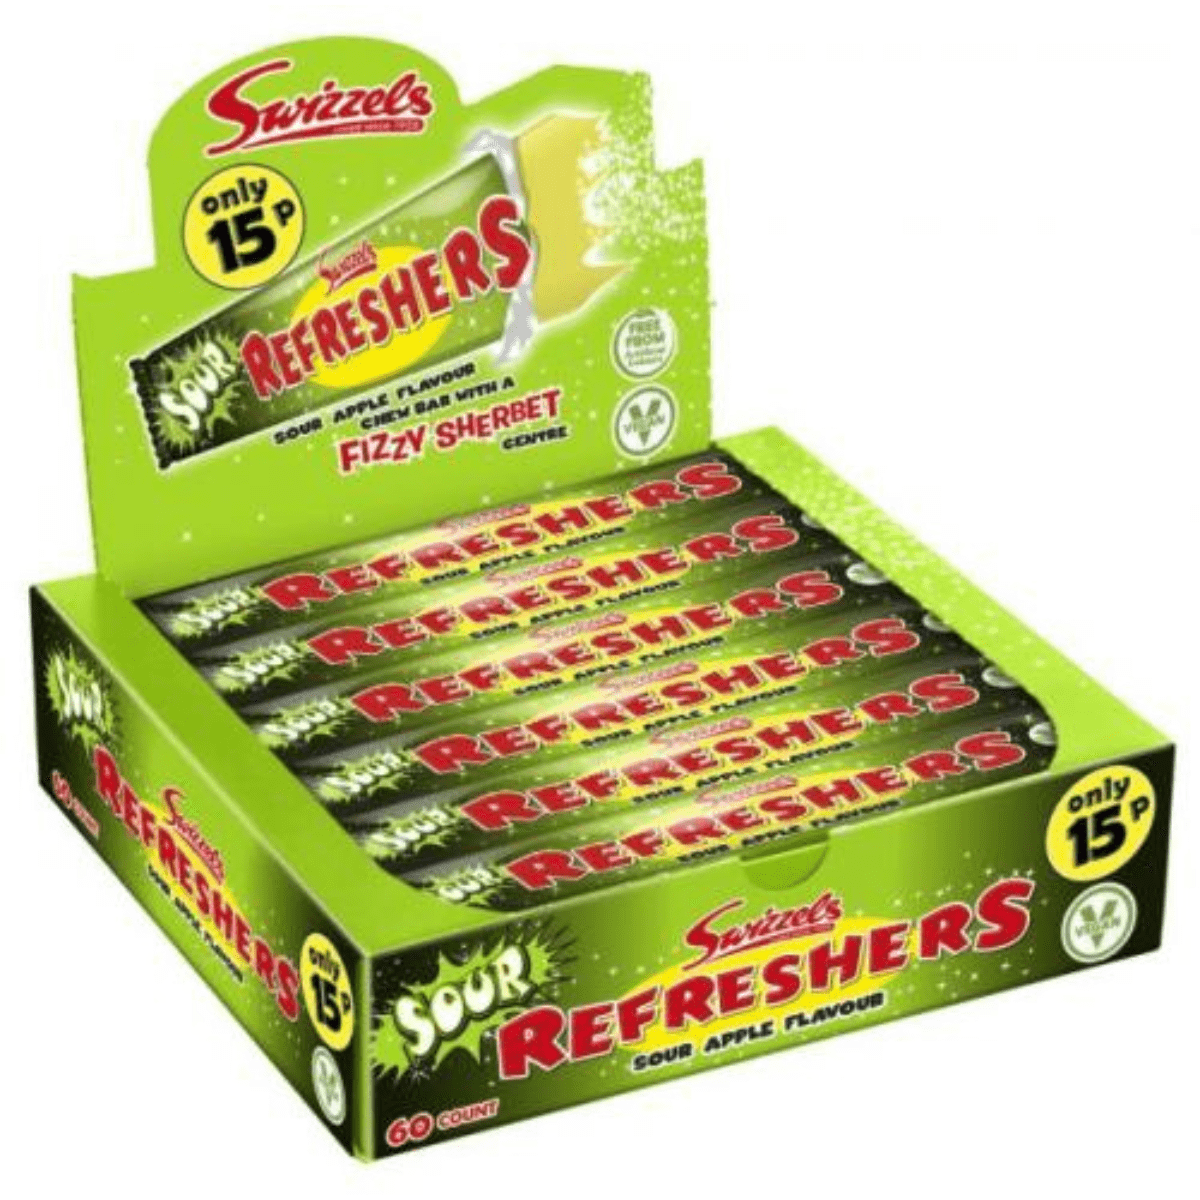 Refreshers Chew Bar Sour Apple